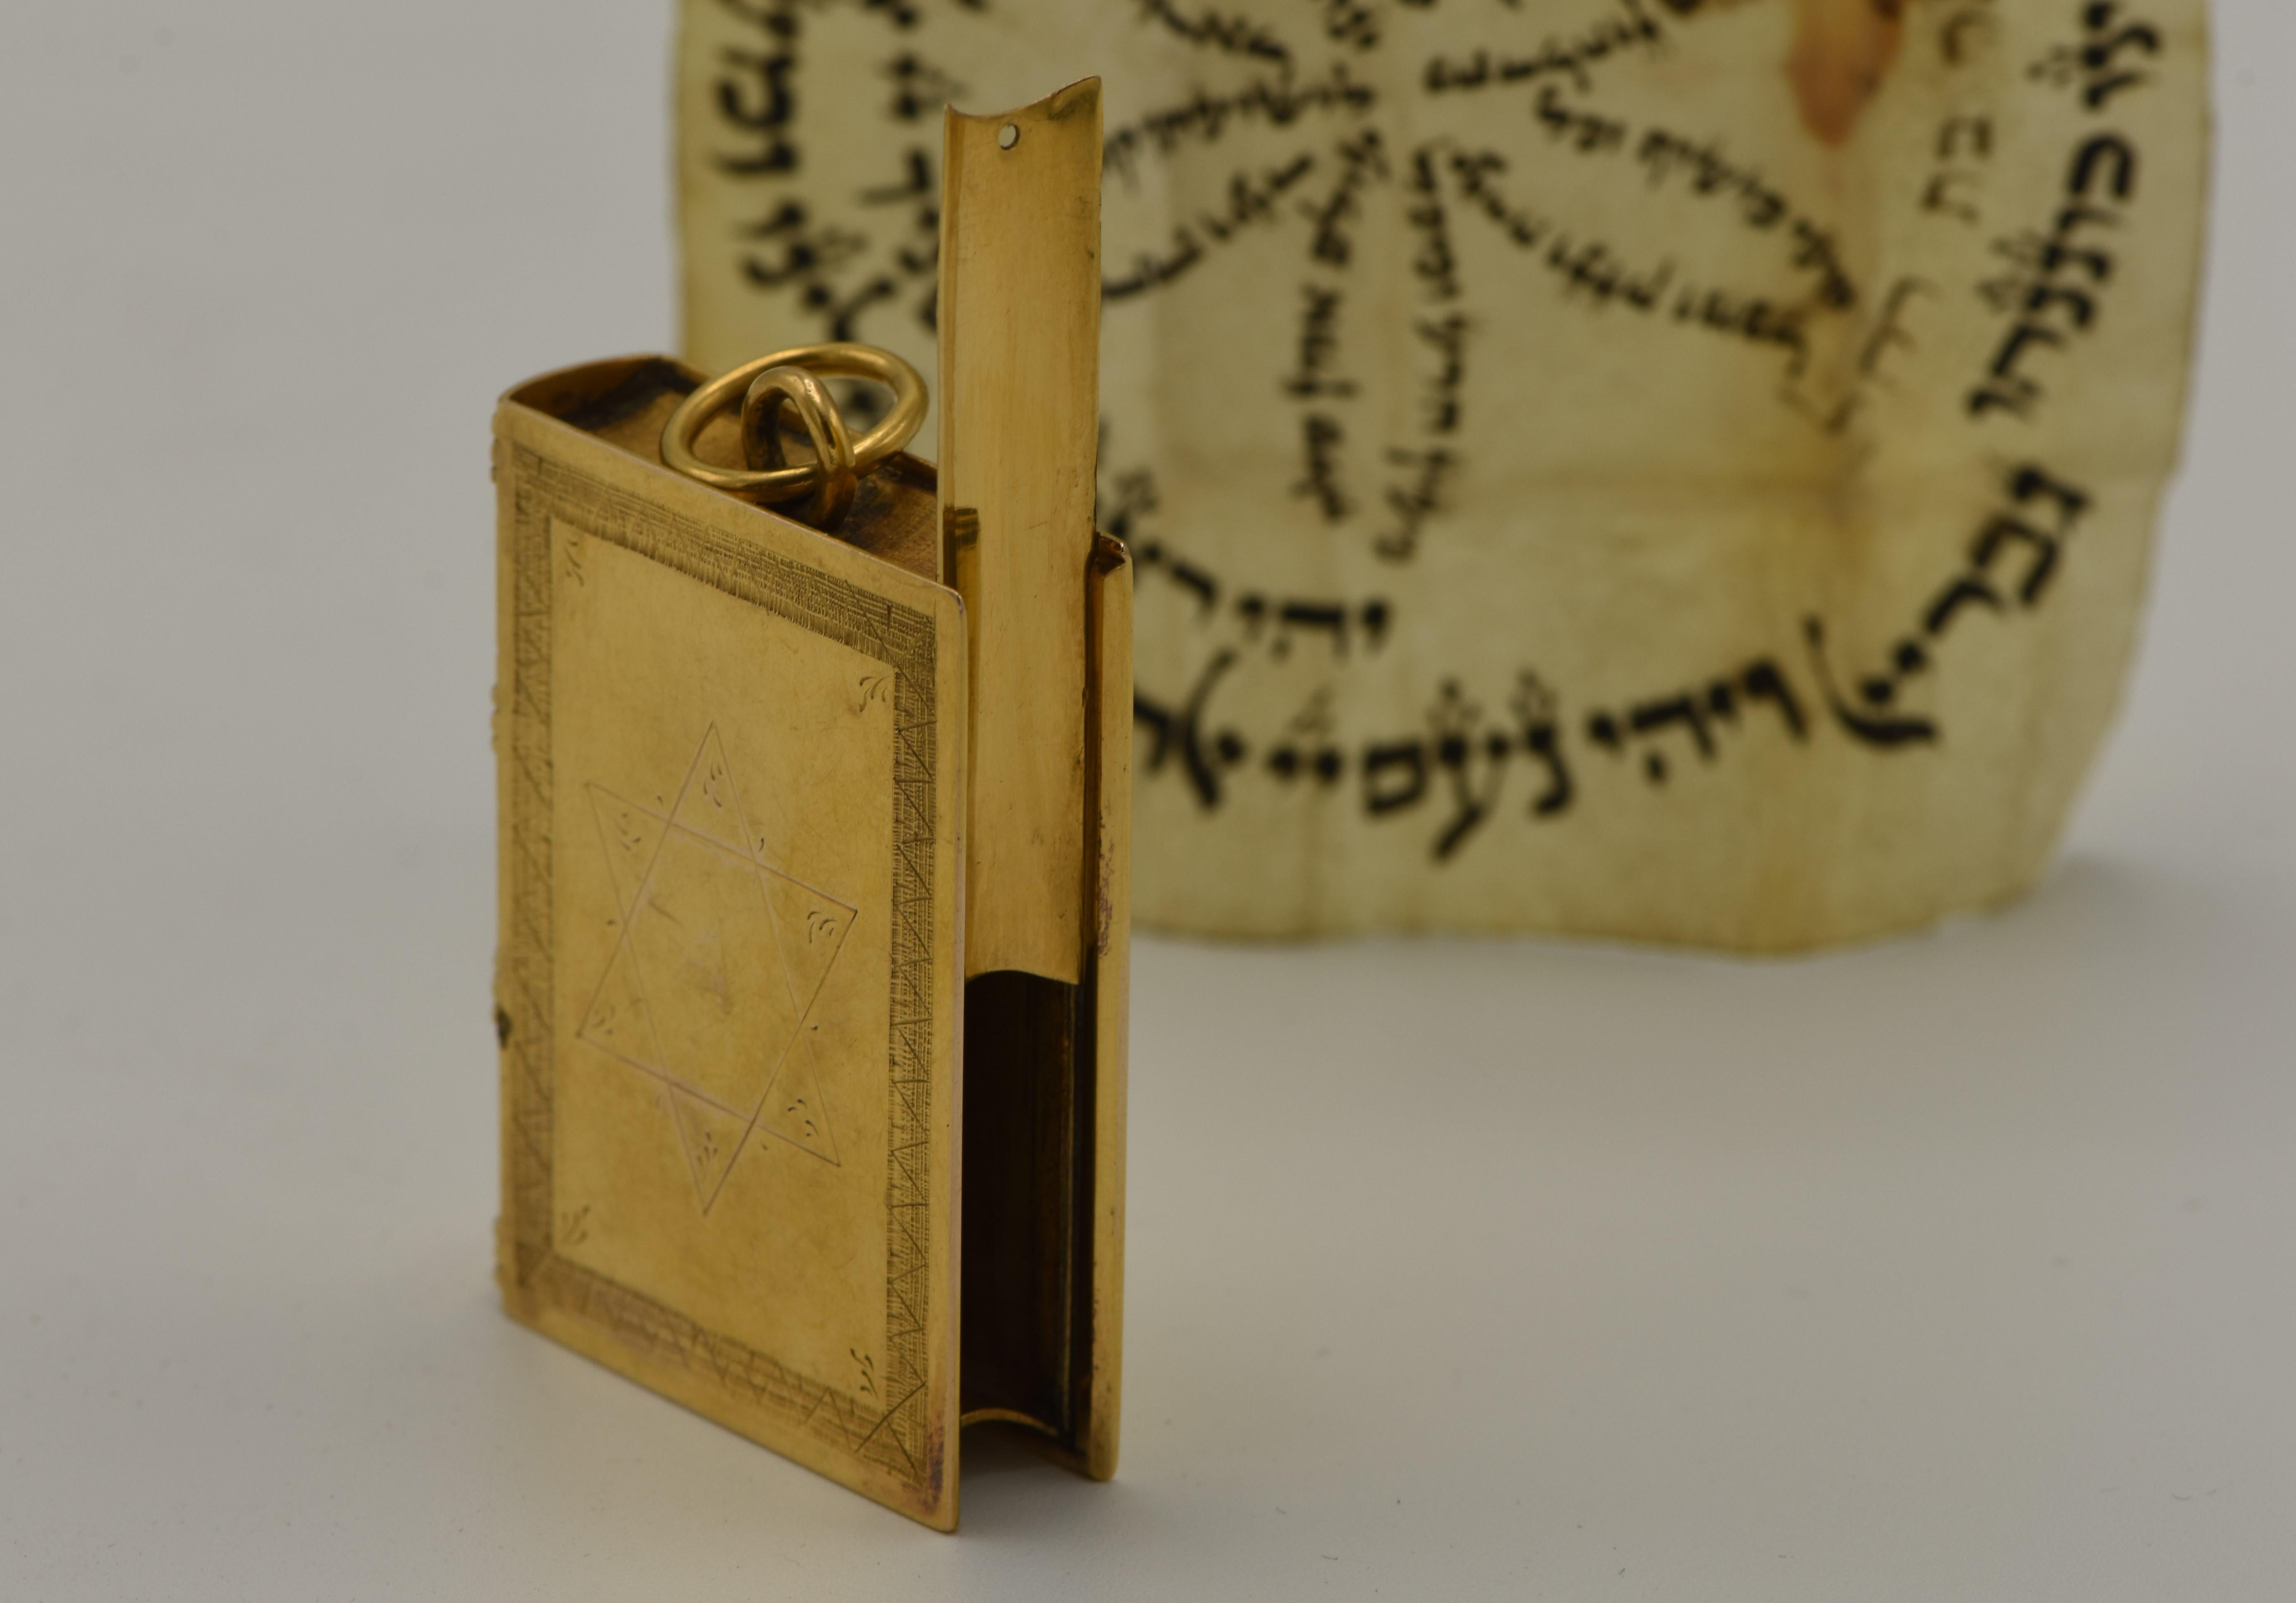 Unique and rare gold Amulet case with the original parchment, the Netherlands, circa 1800.
Solid gold case, book-form, highly detailed with bolt spine. Engraved on the front with Star of David, surrounded by rectangular frame, and on the back with